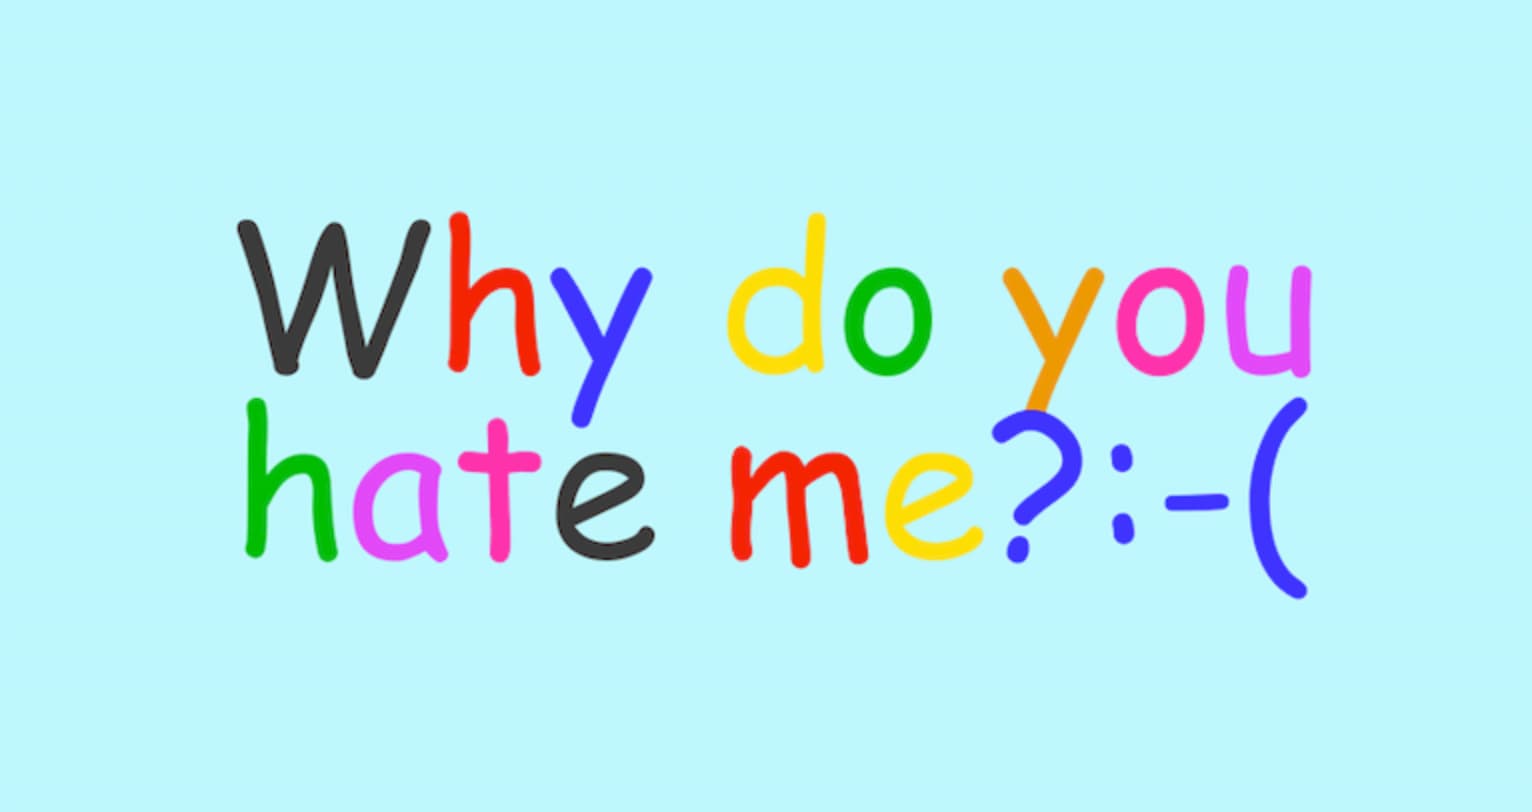 Why do you hate me?